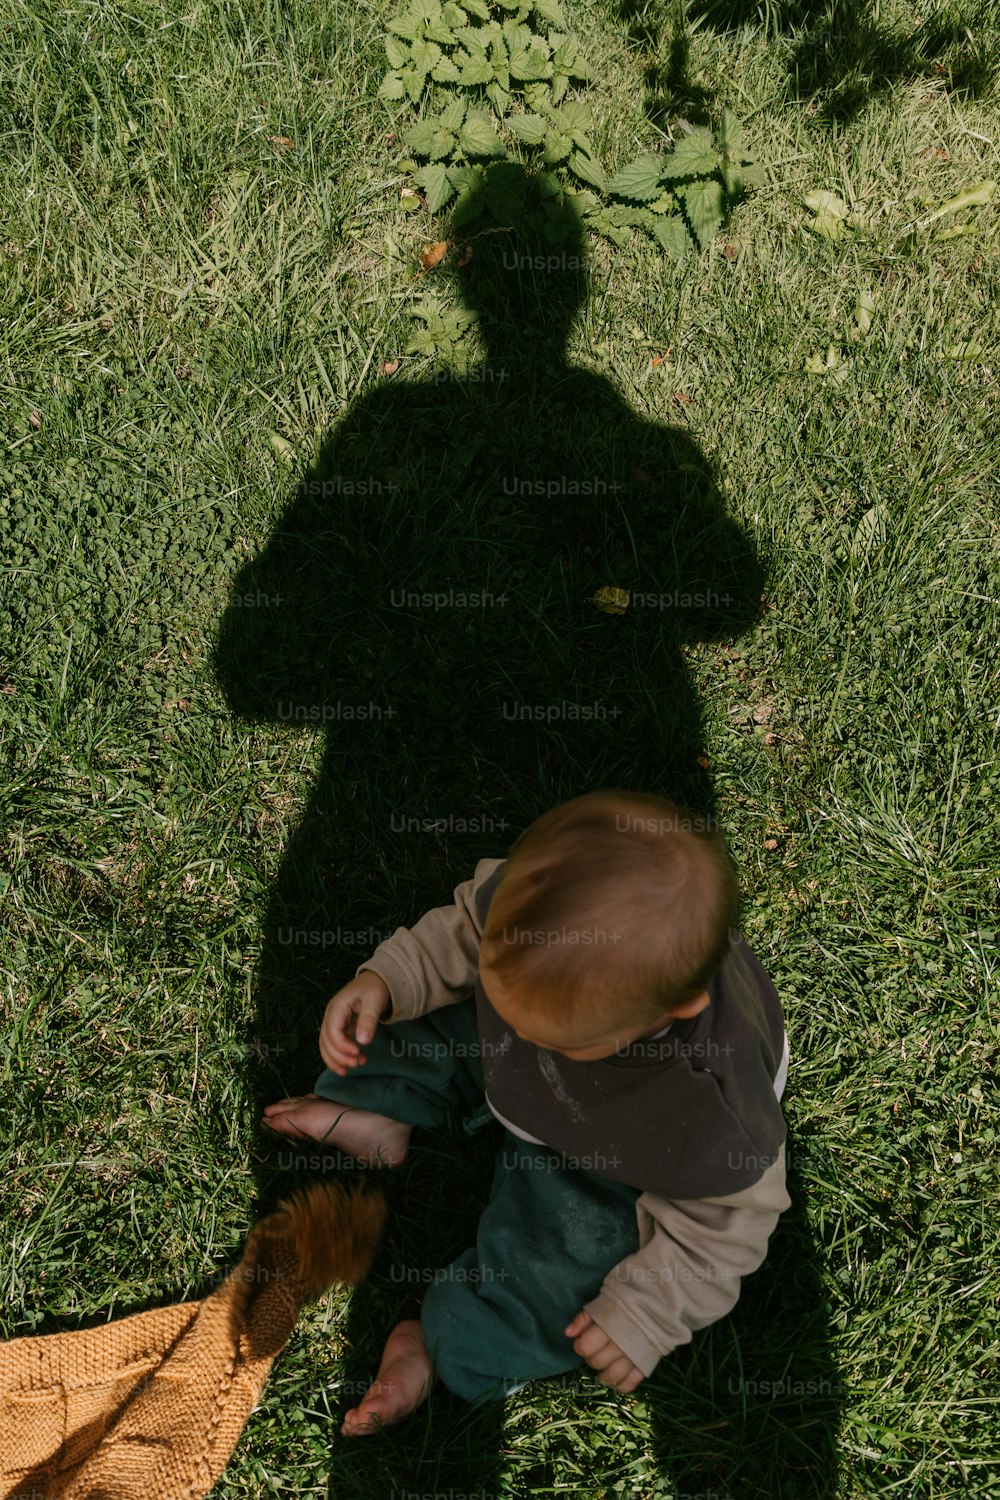 a shadow of a man and a child on the grass